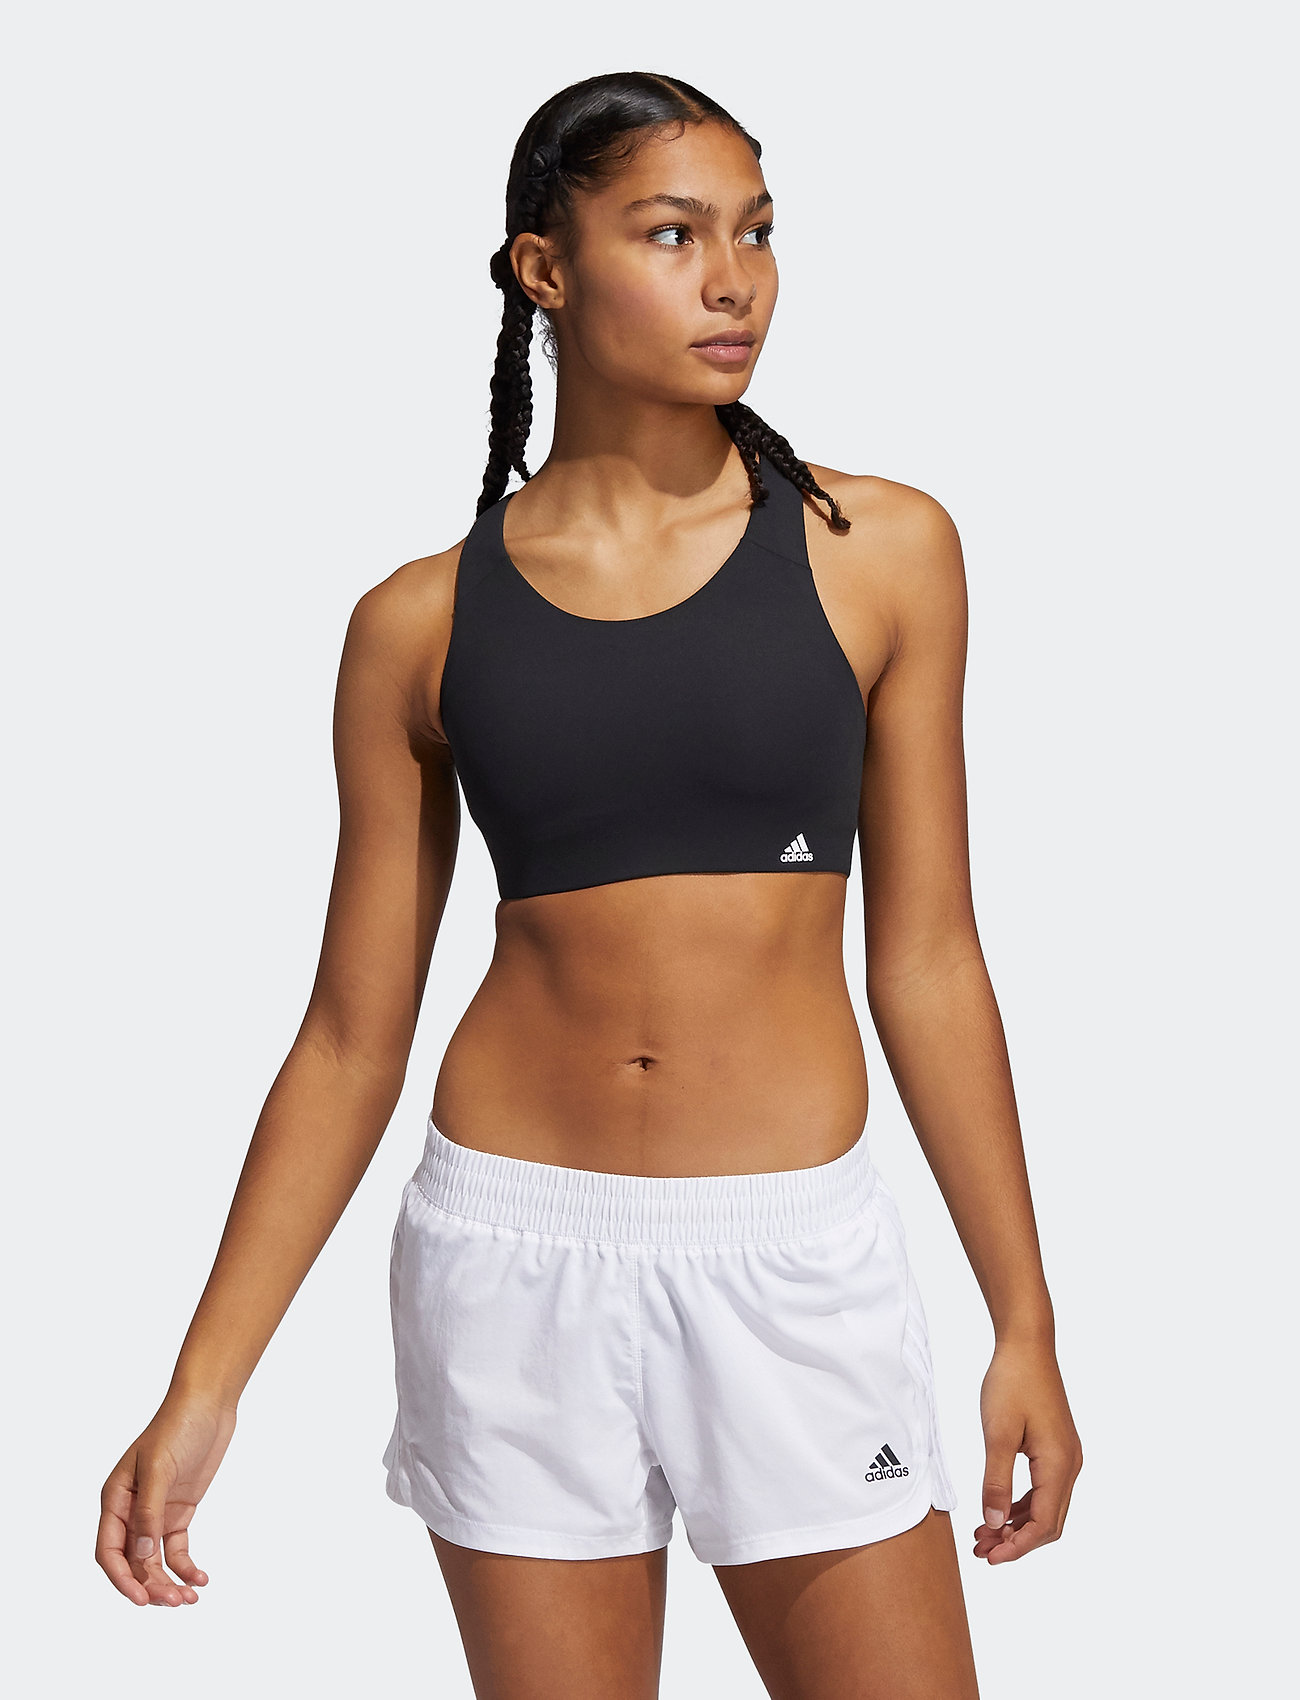 Supersports - 📣 ADIDAS : REIMAGINE SPORT 👉 Women's Training Bra 💵 Price  : 2,400 THB 🔸 Size : 70A, 70B, 75B 📍 Available at : CentralWorld  #SupersportsThailand #AdidasThailand